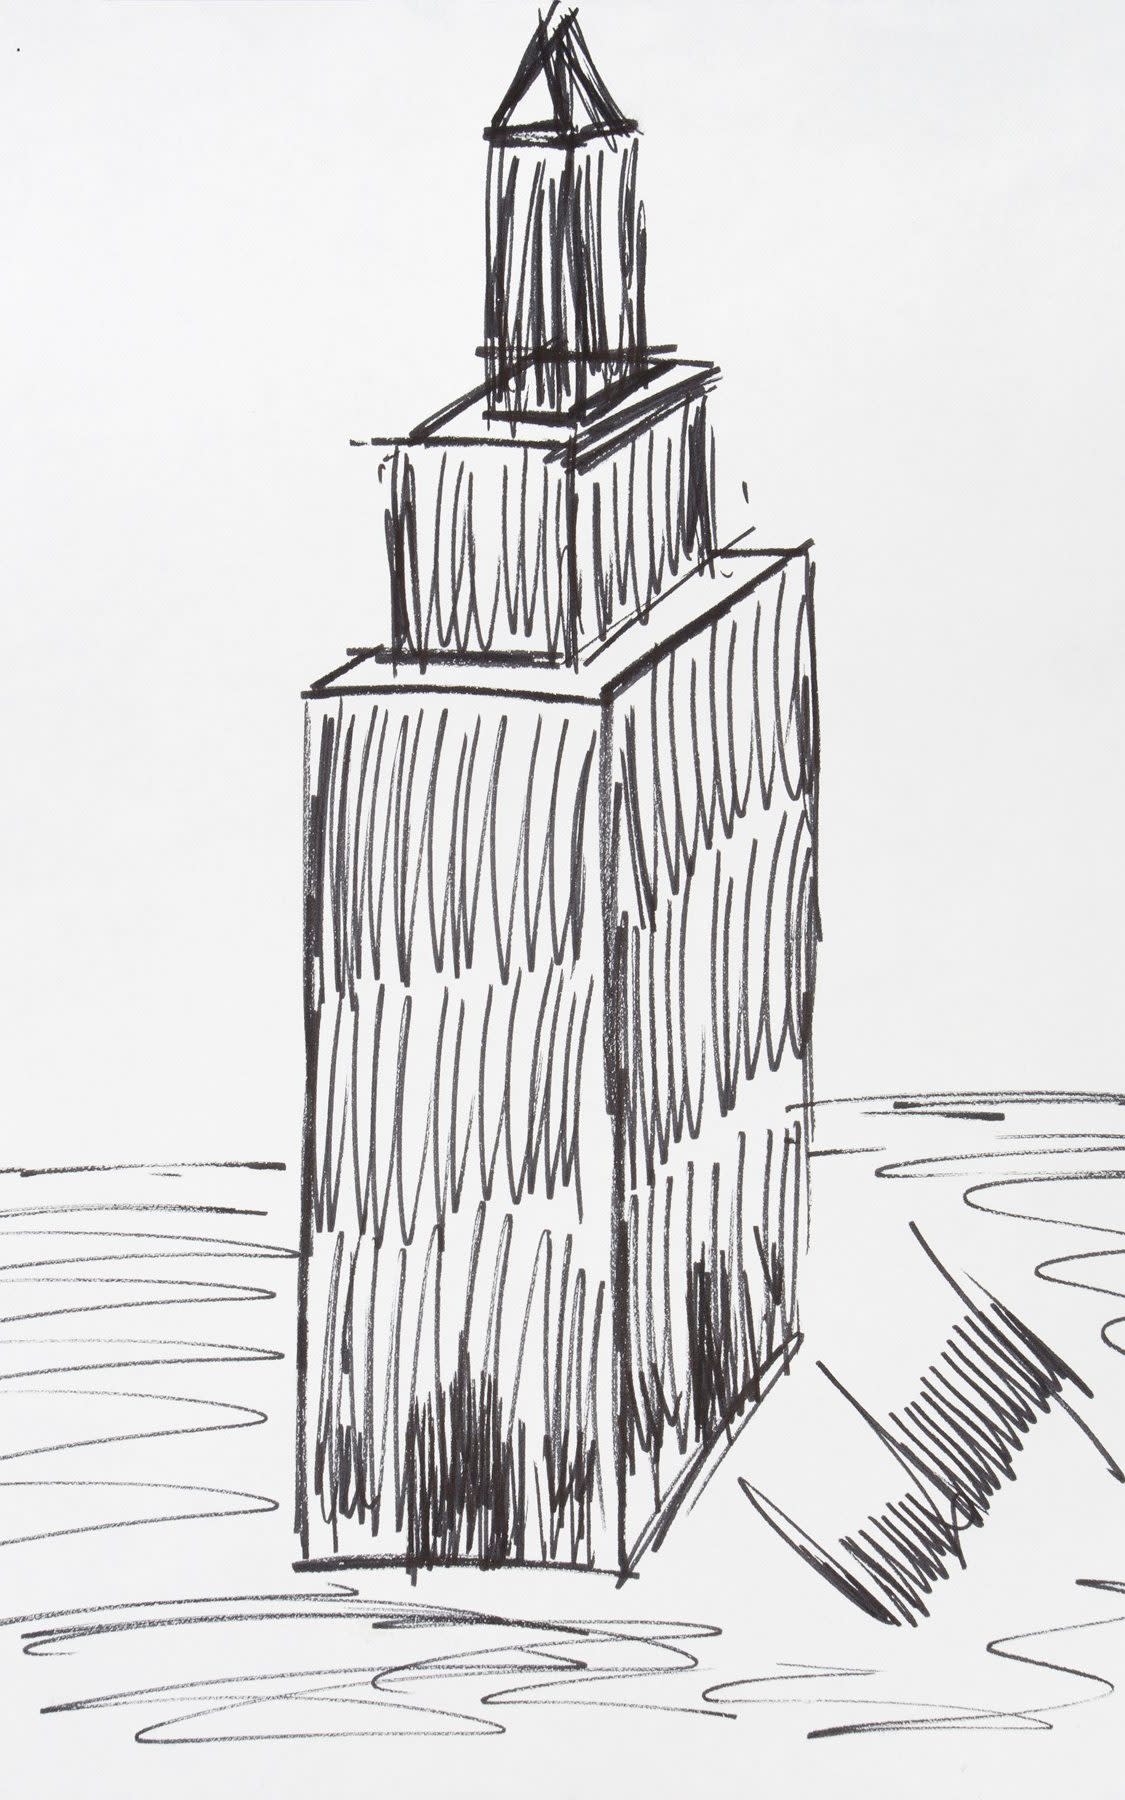 This image provided by Julien's Auctions shows a sketch of the Empire State Building drawn by President Donald Trump that sold for $16,000 at auction on Oct. 19, 2017 - Julien's Auctions